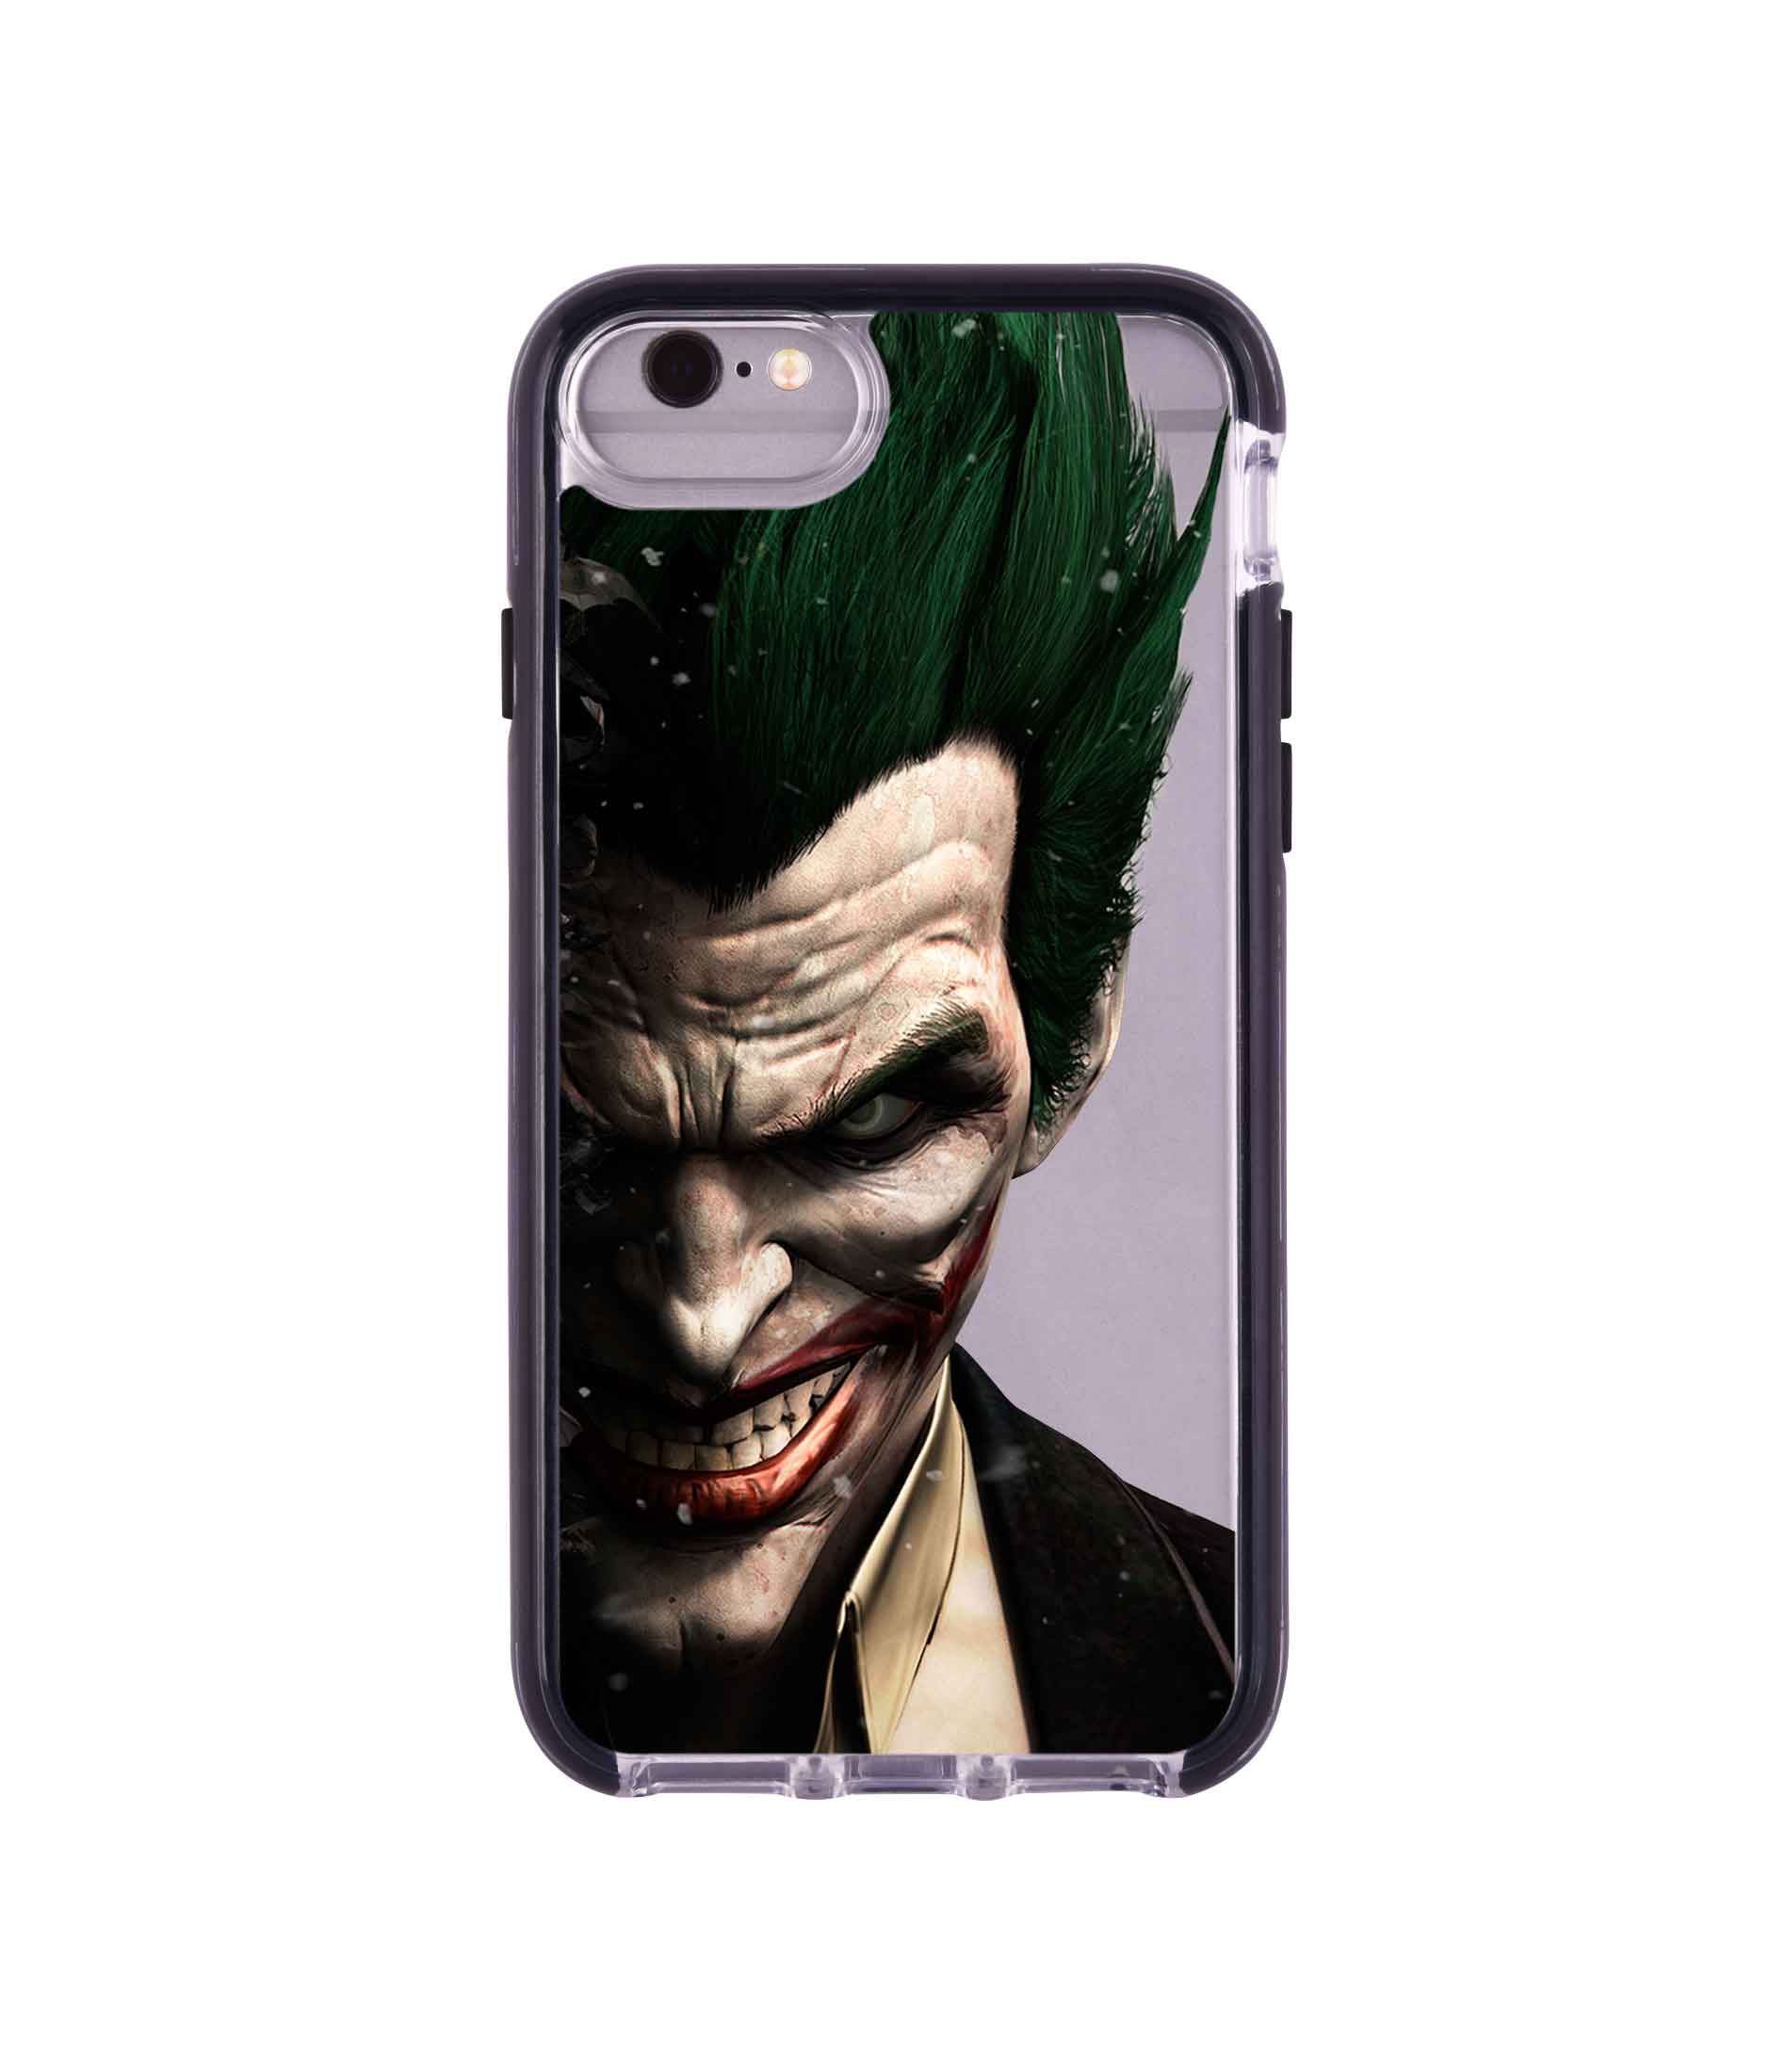 Joker Withers - Extreme Phone Case for iPhone 6